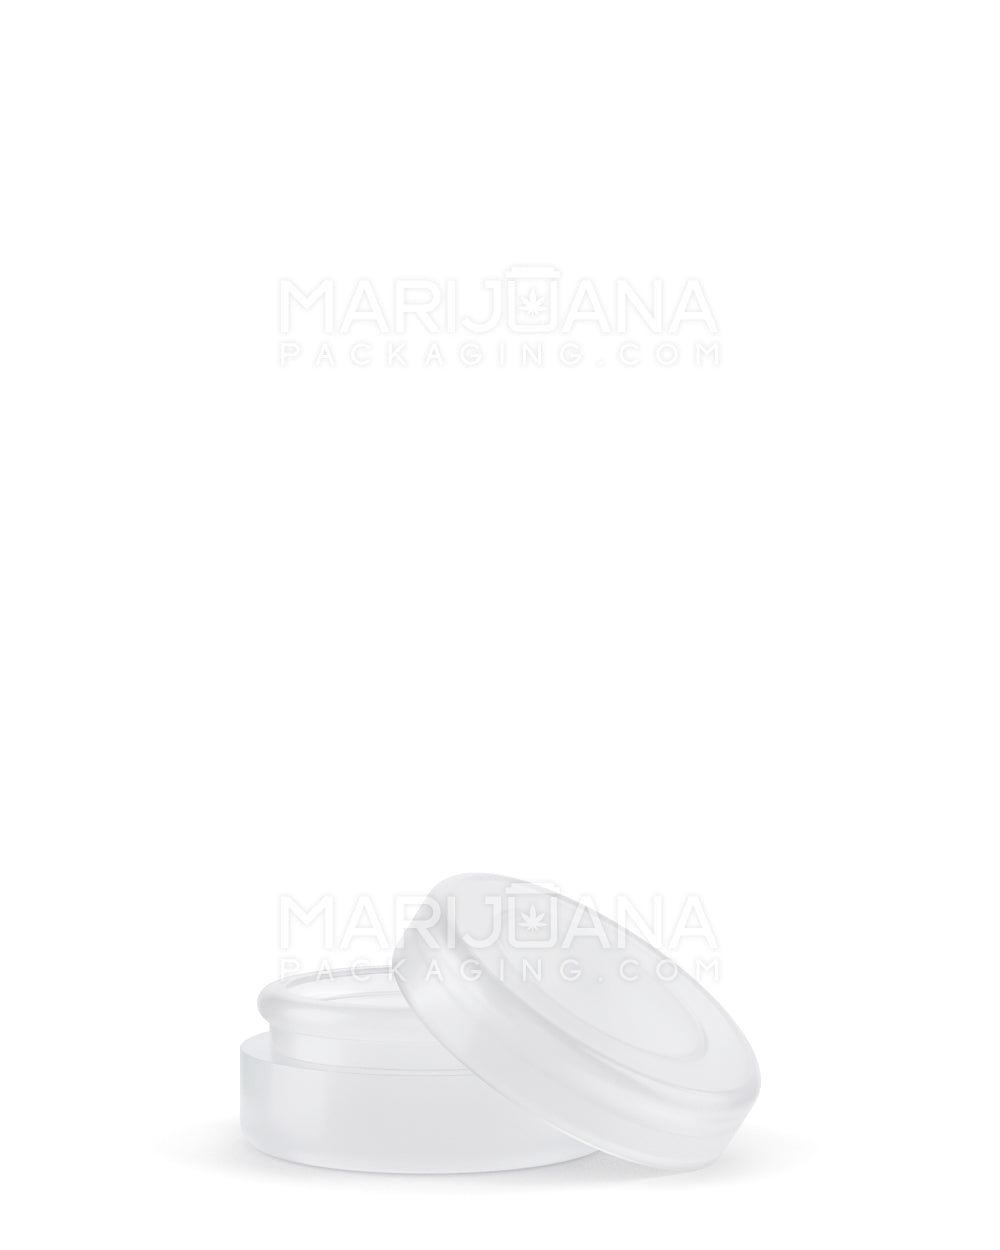 Platinum Cured Non-Stick Concentrate Containers | 5mL - Silicone | Sample - 1